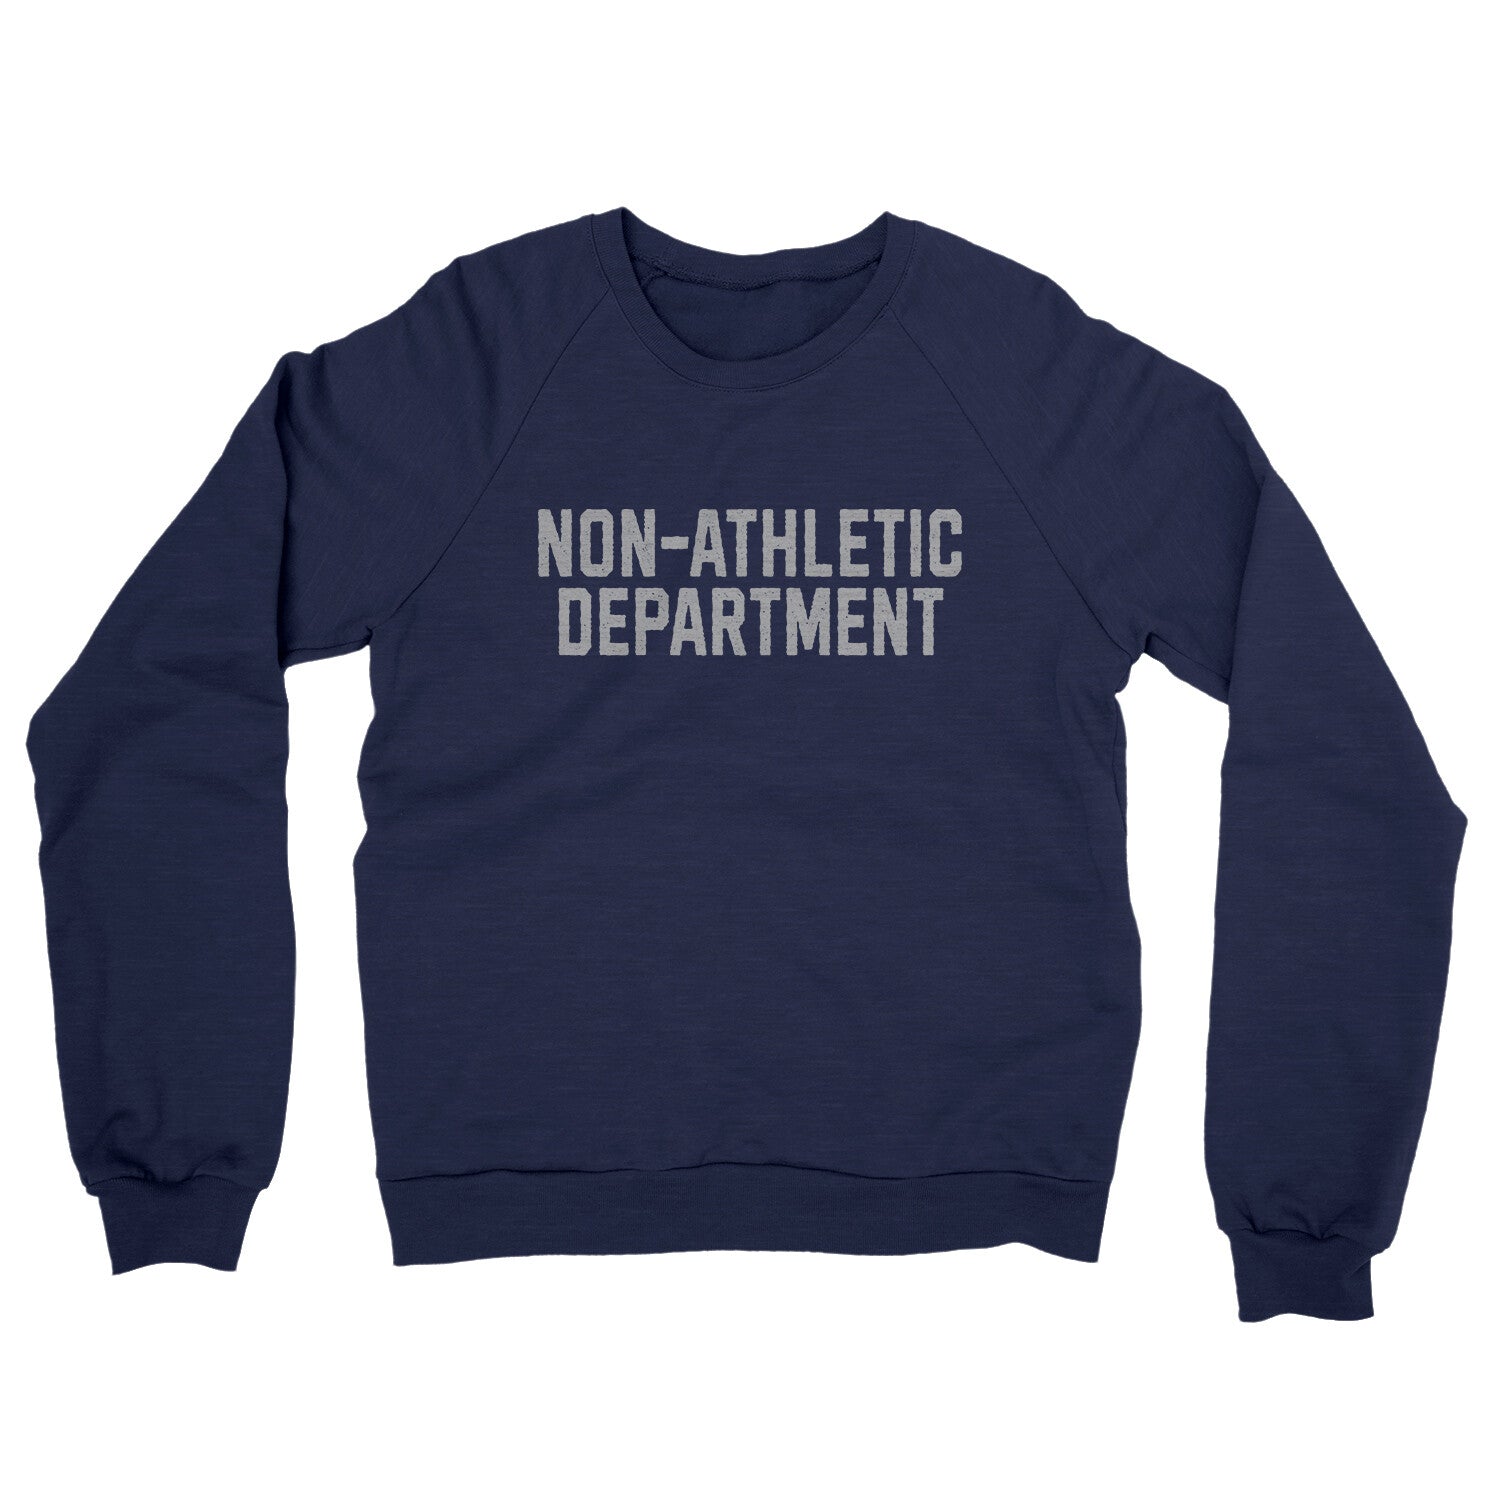 Non-Athletic Department in Navy Color